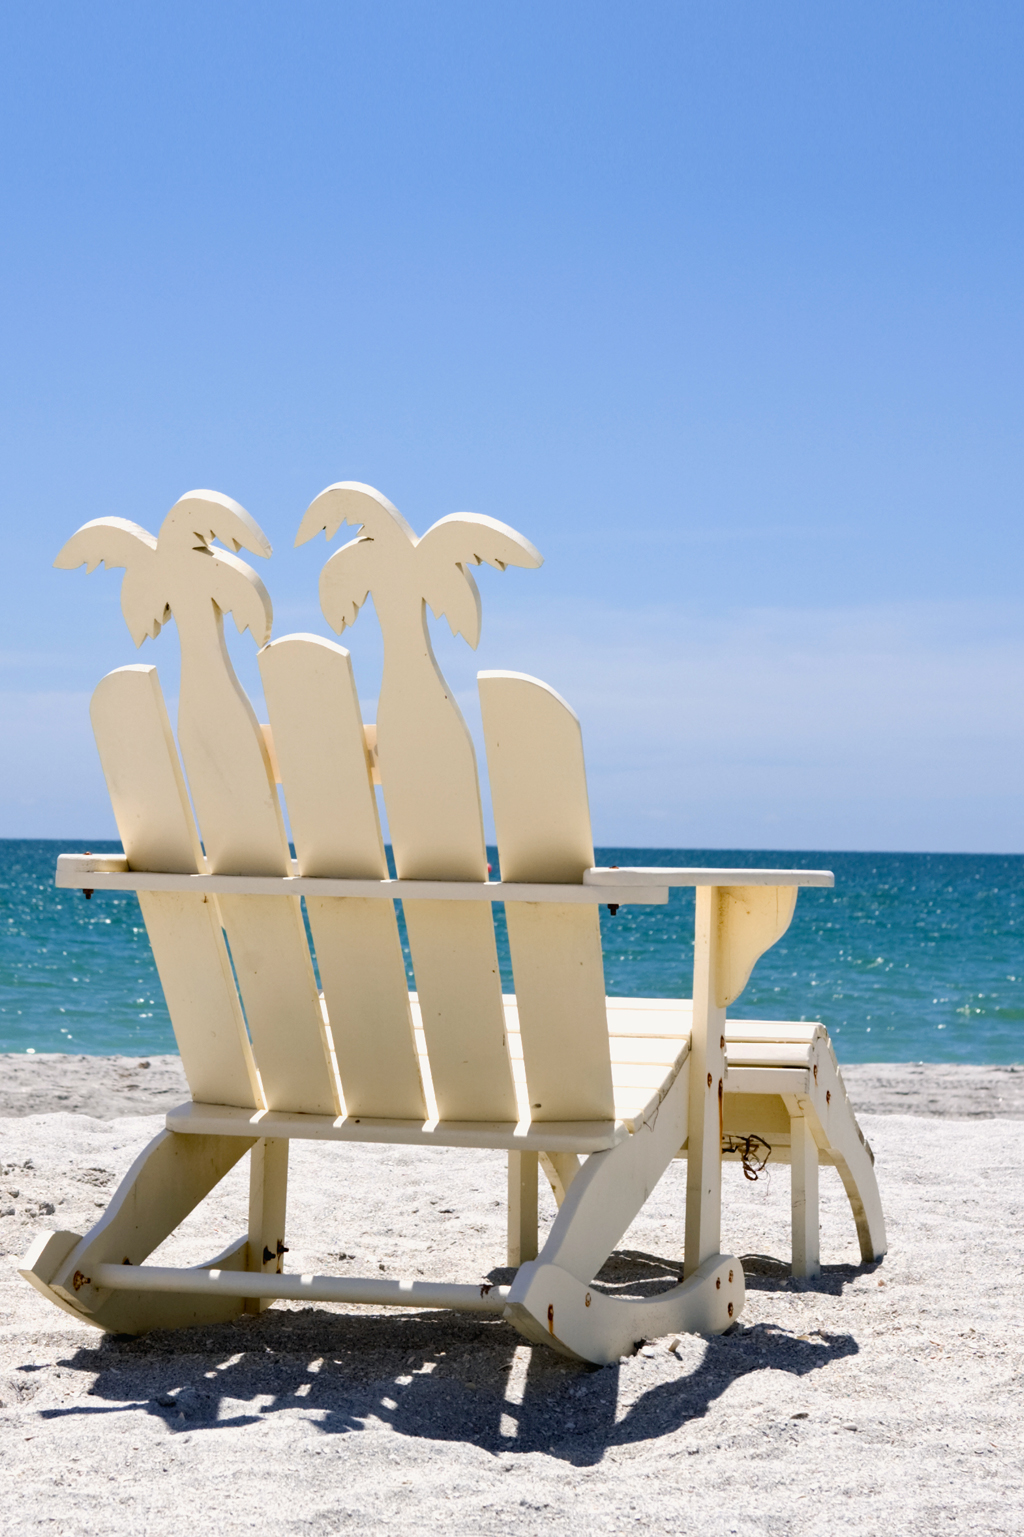 Beach chair on white sand overlooking a turquoise sea.